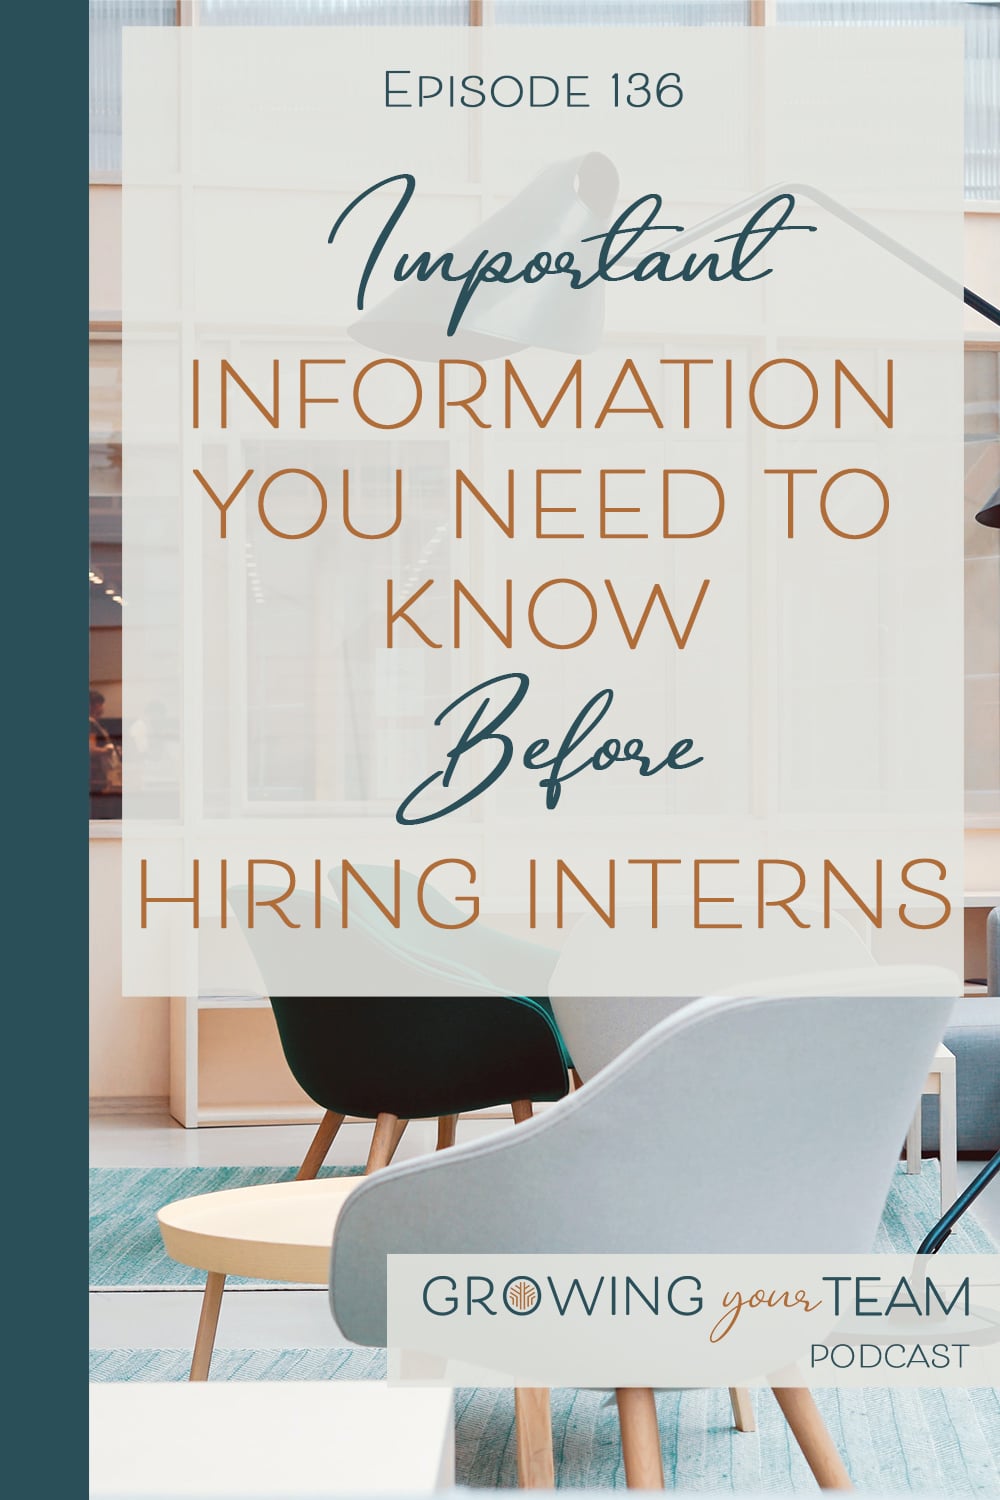 Important Information You Need to Know Before Hiring Interns, Growing Your Team Podcast, Jamie Van Cuyk, Small Business